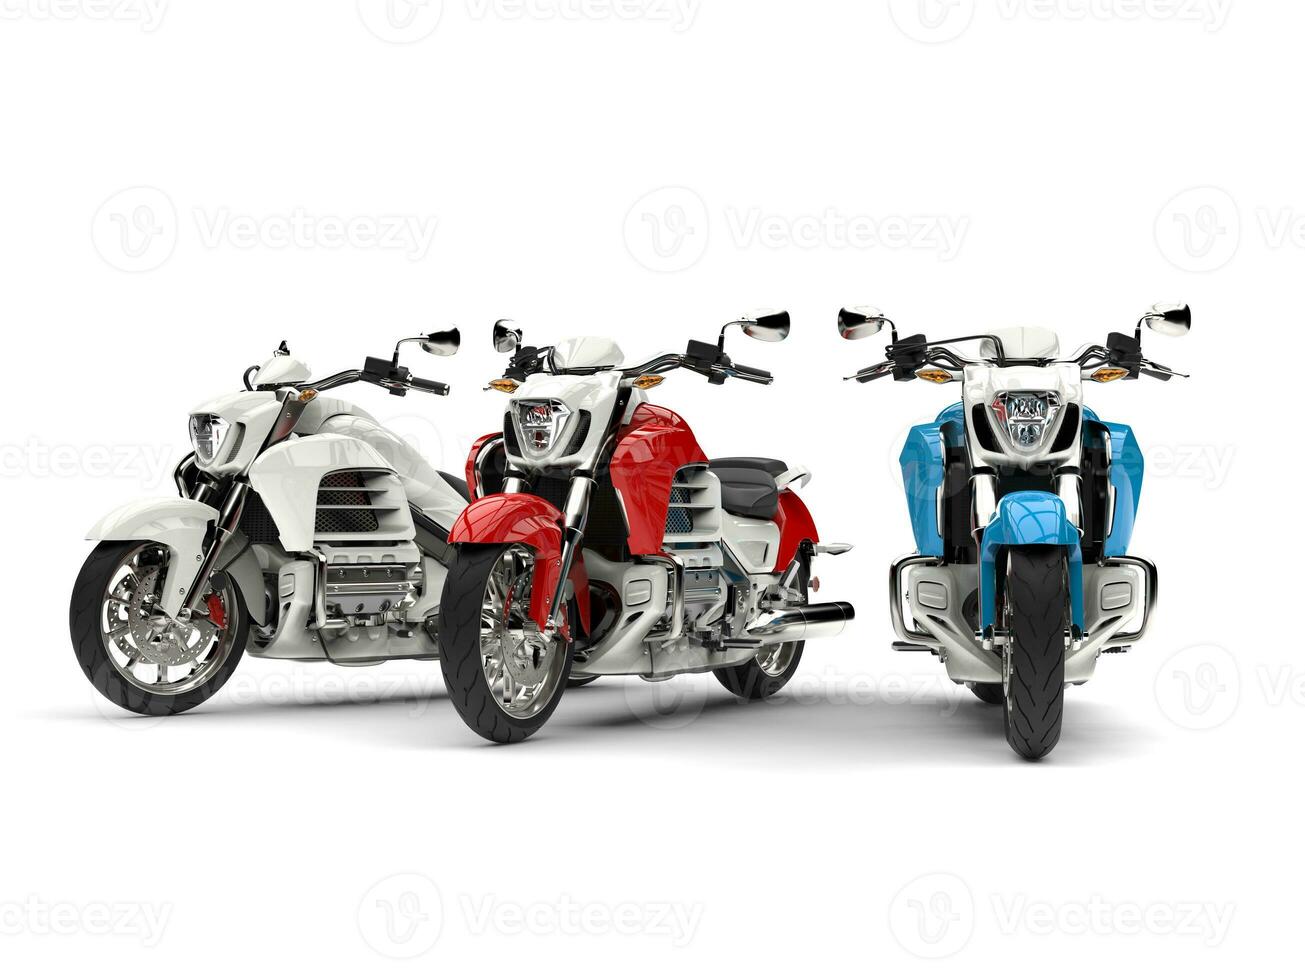 Cool shopper bikes in red, white and blue photo